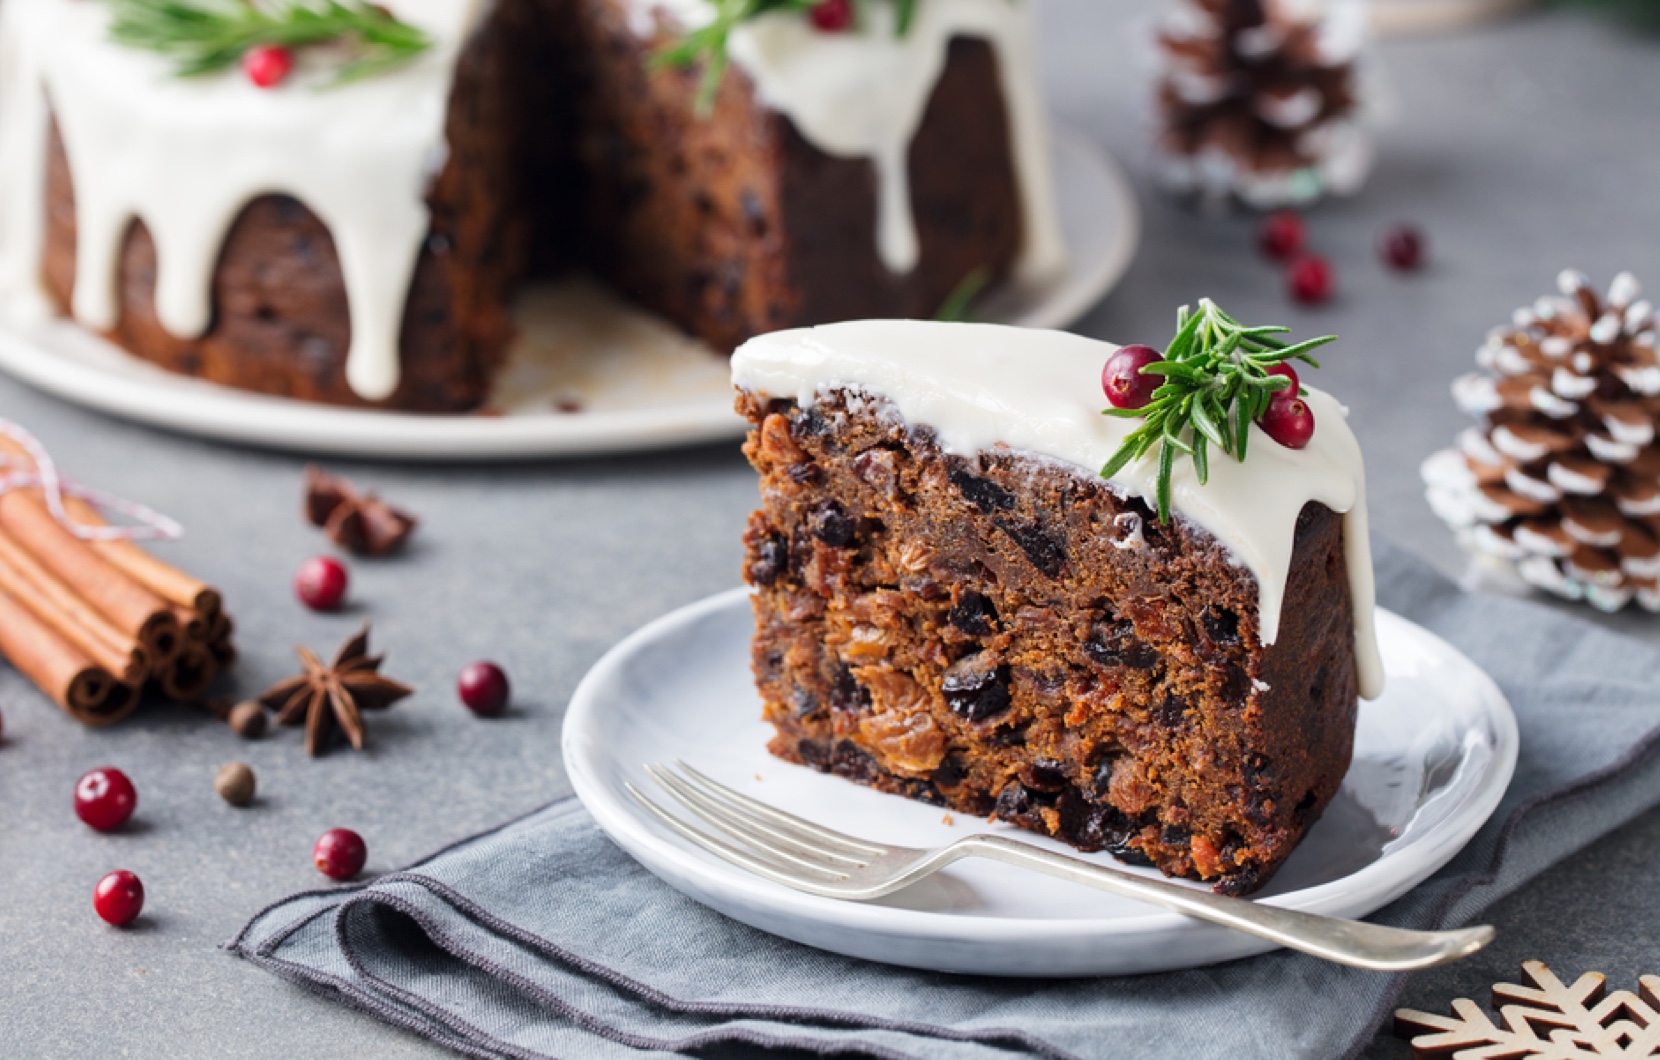 This is one fruit cake you won't want to share.